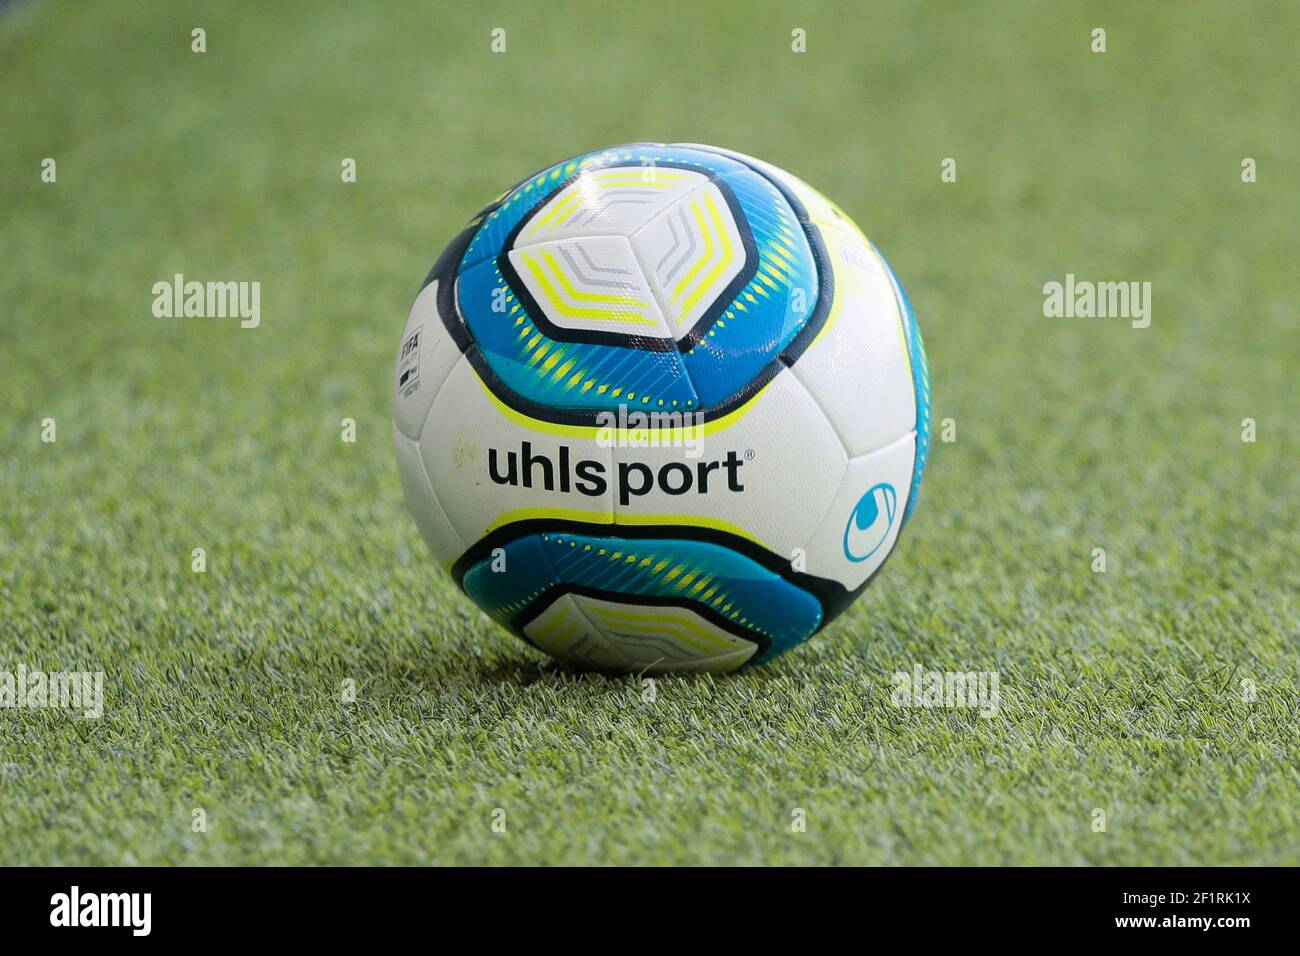 Official soccer ball Ligue 1 Conforama Uhlsport Elysia illustration during  the French championship L1 football match between Paris Saint-Germain and  RC Strasbourg Alsace on September 14, 2019 at Parc des Princes stadium